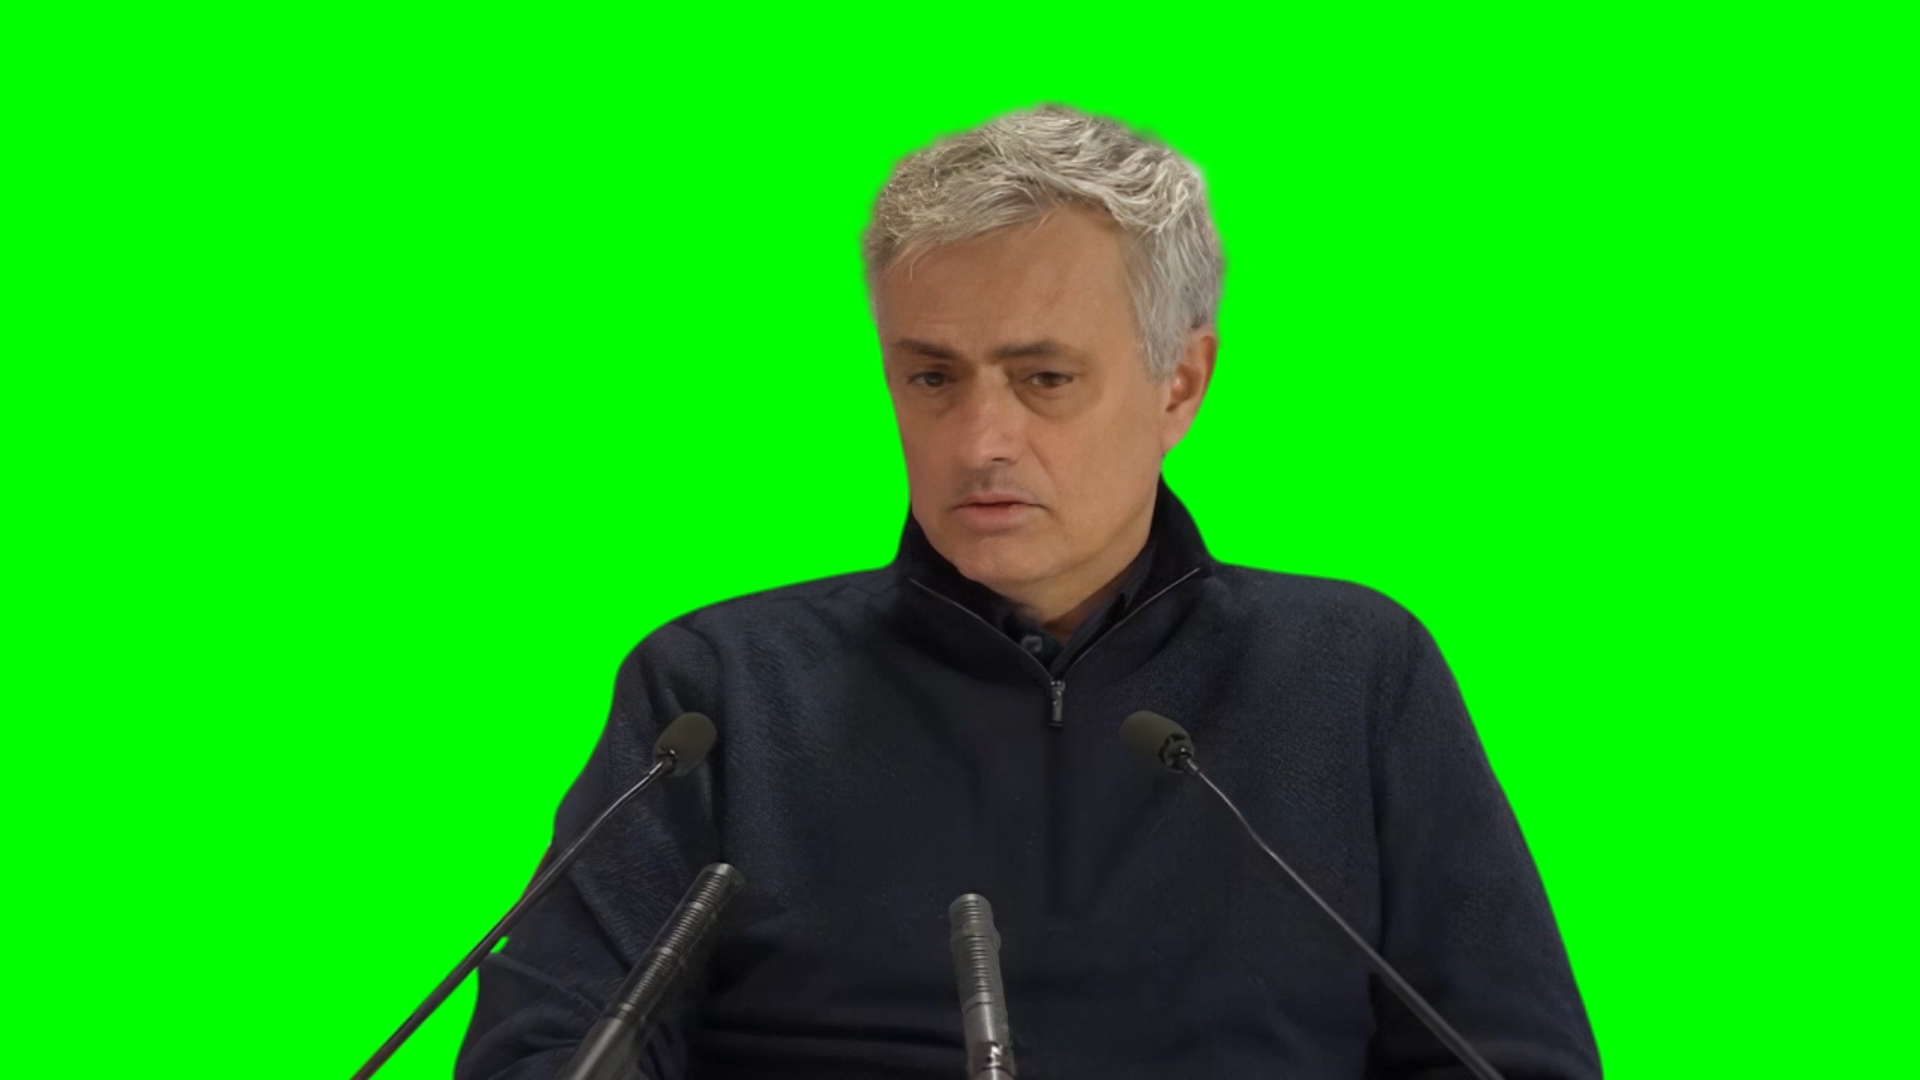 Jose Mourinho - I was rude but I was rude to an idiot (Green Screen)